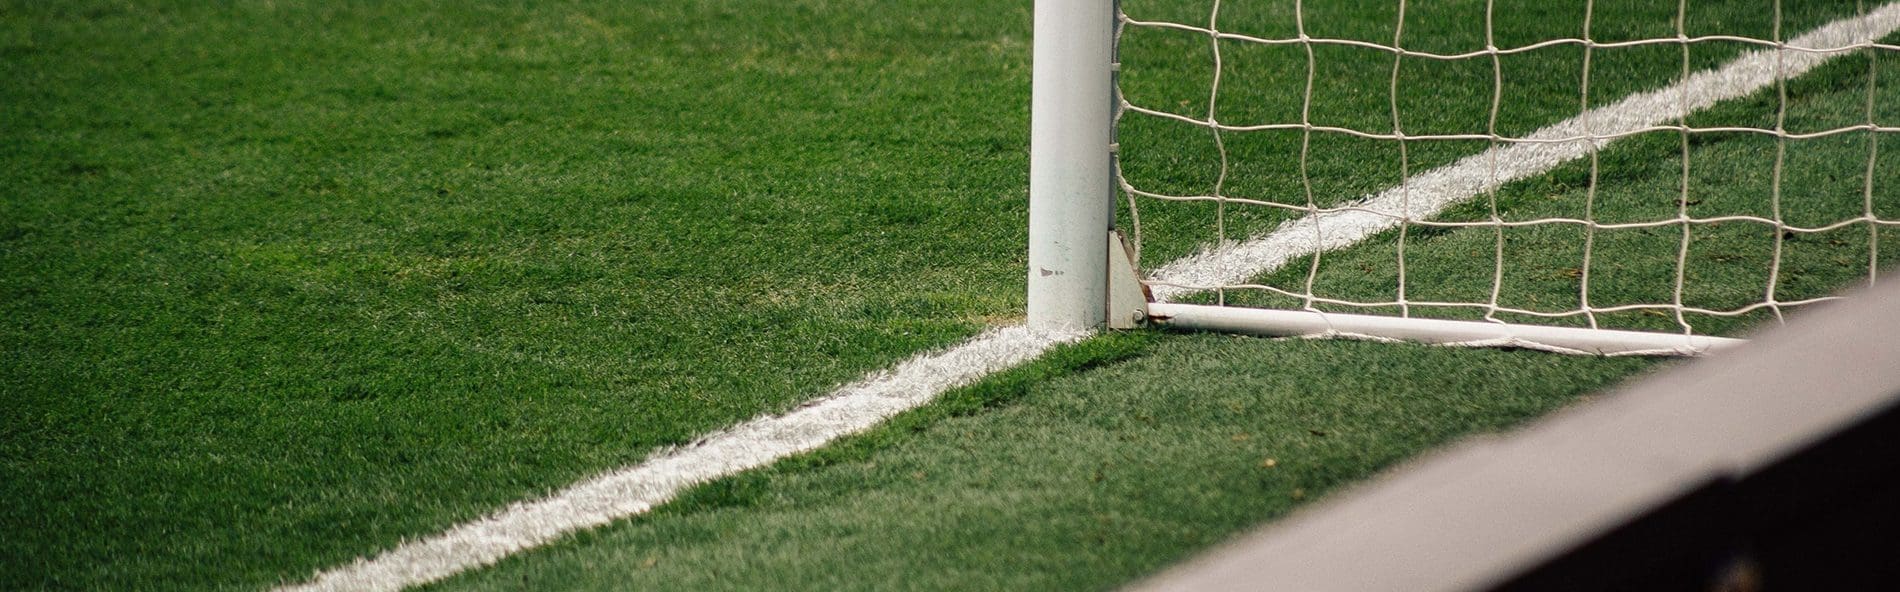 a close up of the bottom of a football goal post and net, pitch in the forefront